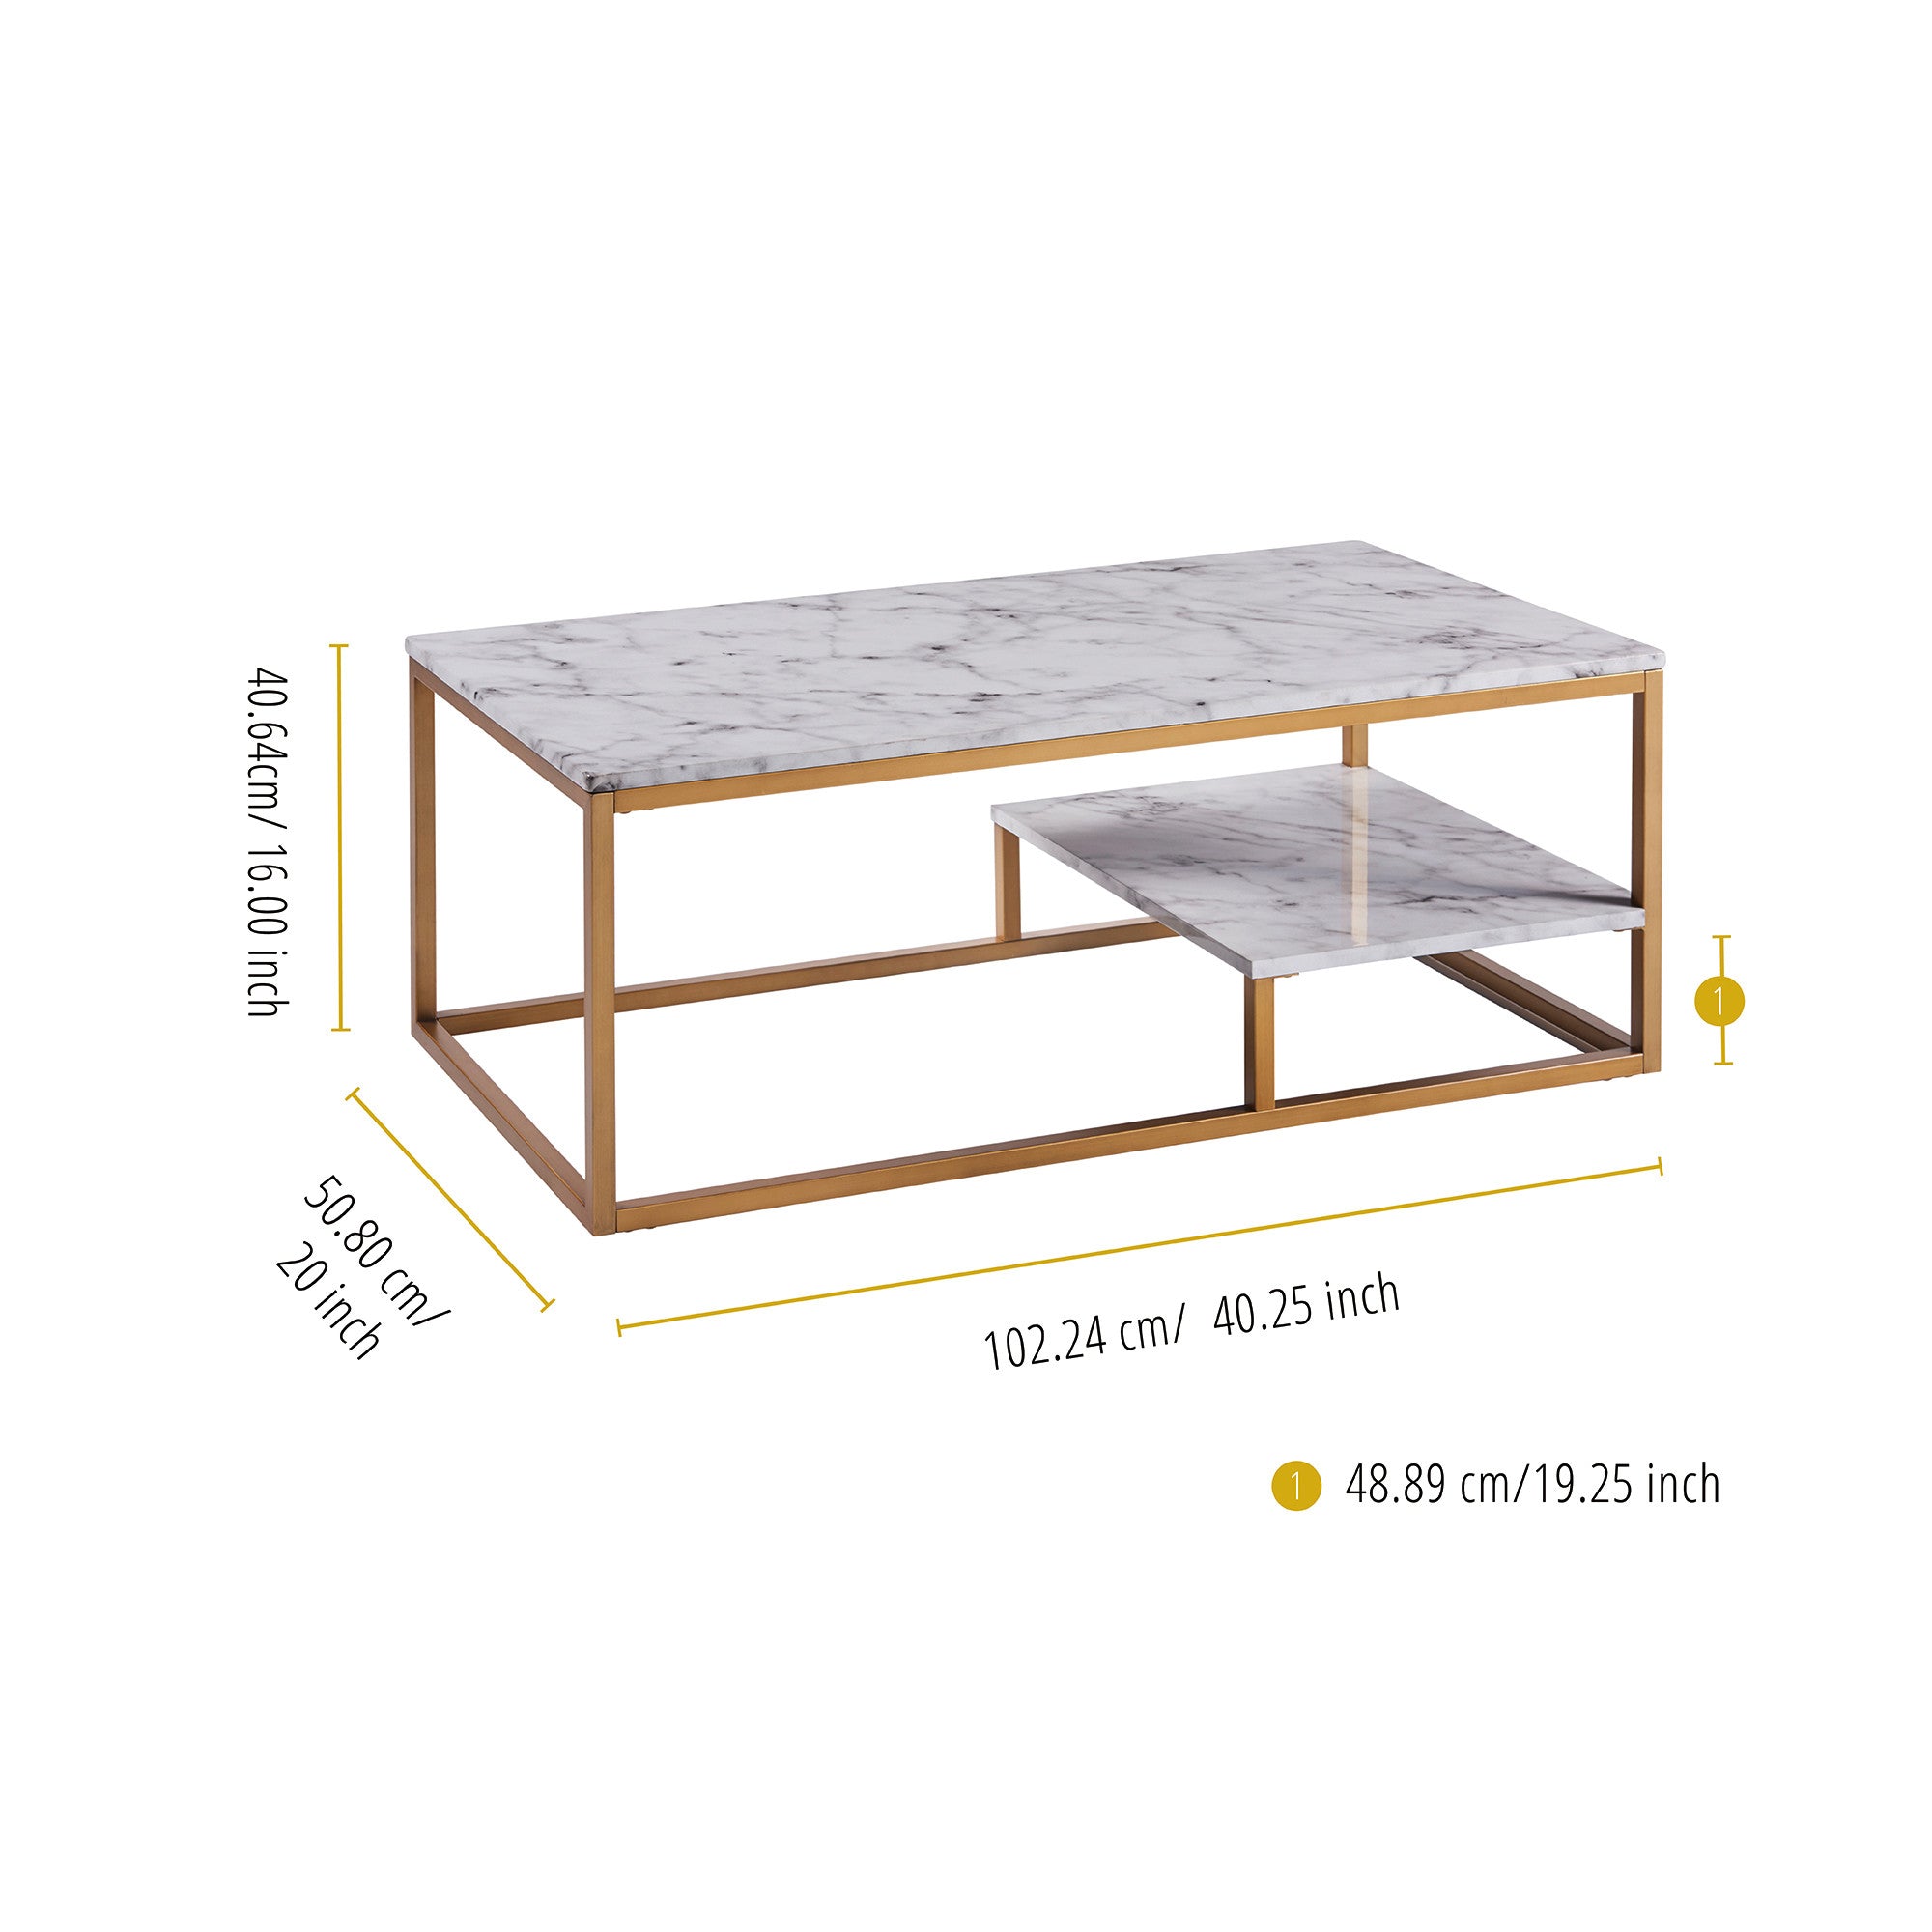 Teamson Home Marmo Modern Marble-Look Coffee Table with Shelf, Marble/Brass